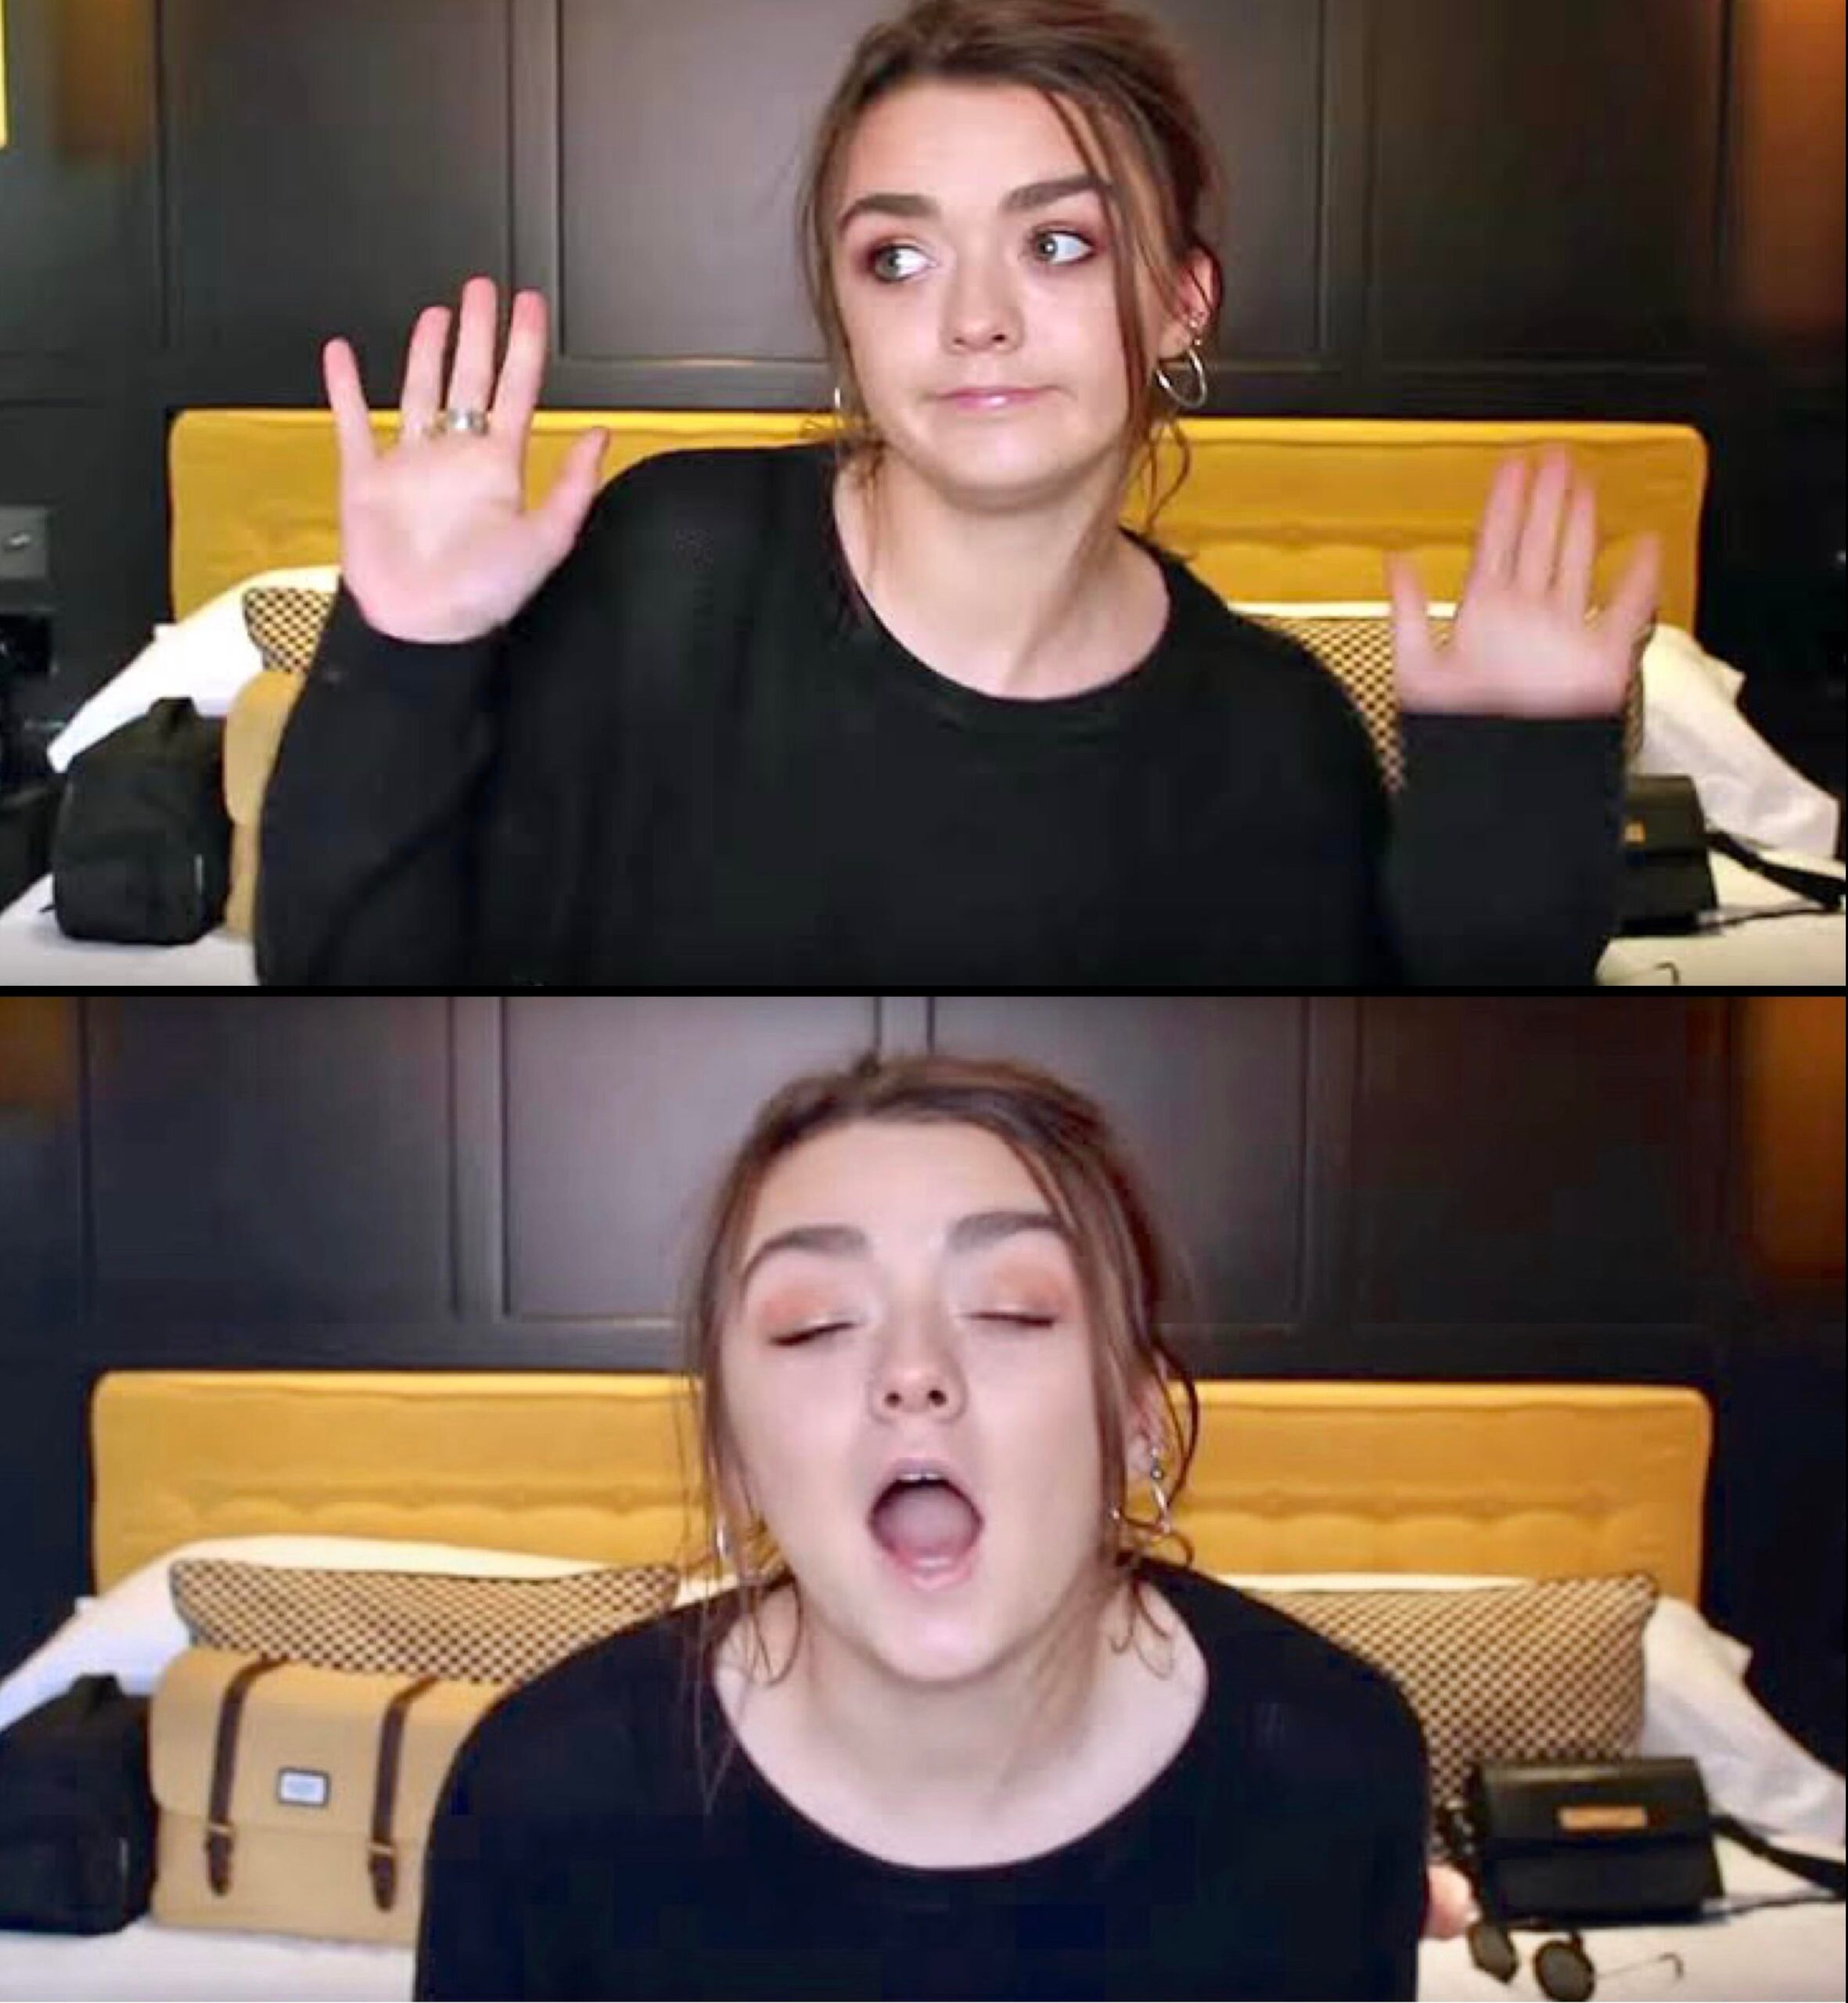 Maisie Williams looks like shes the kind of girl that